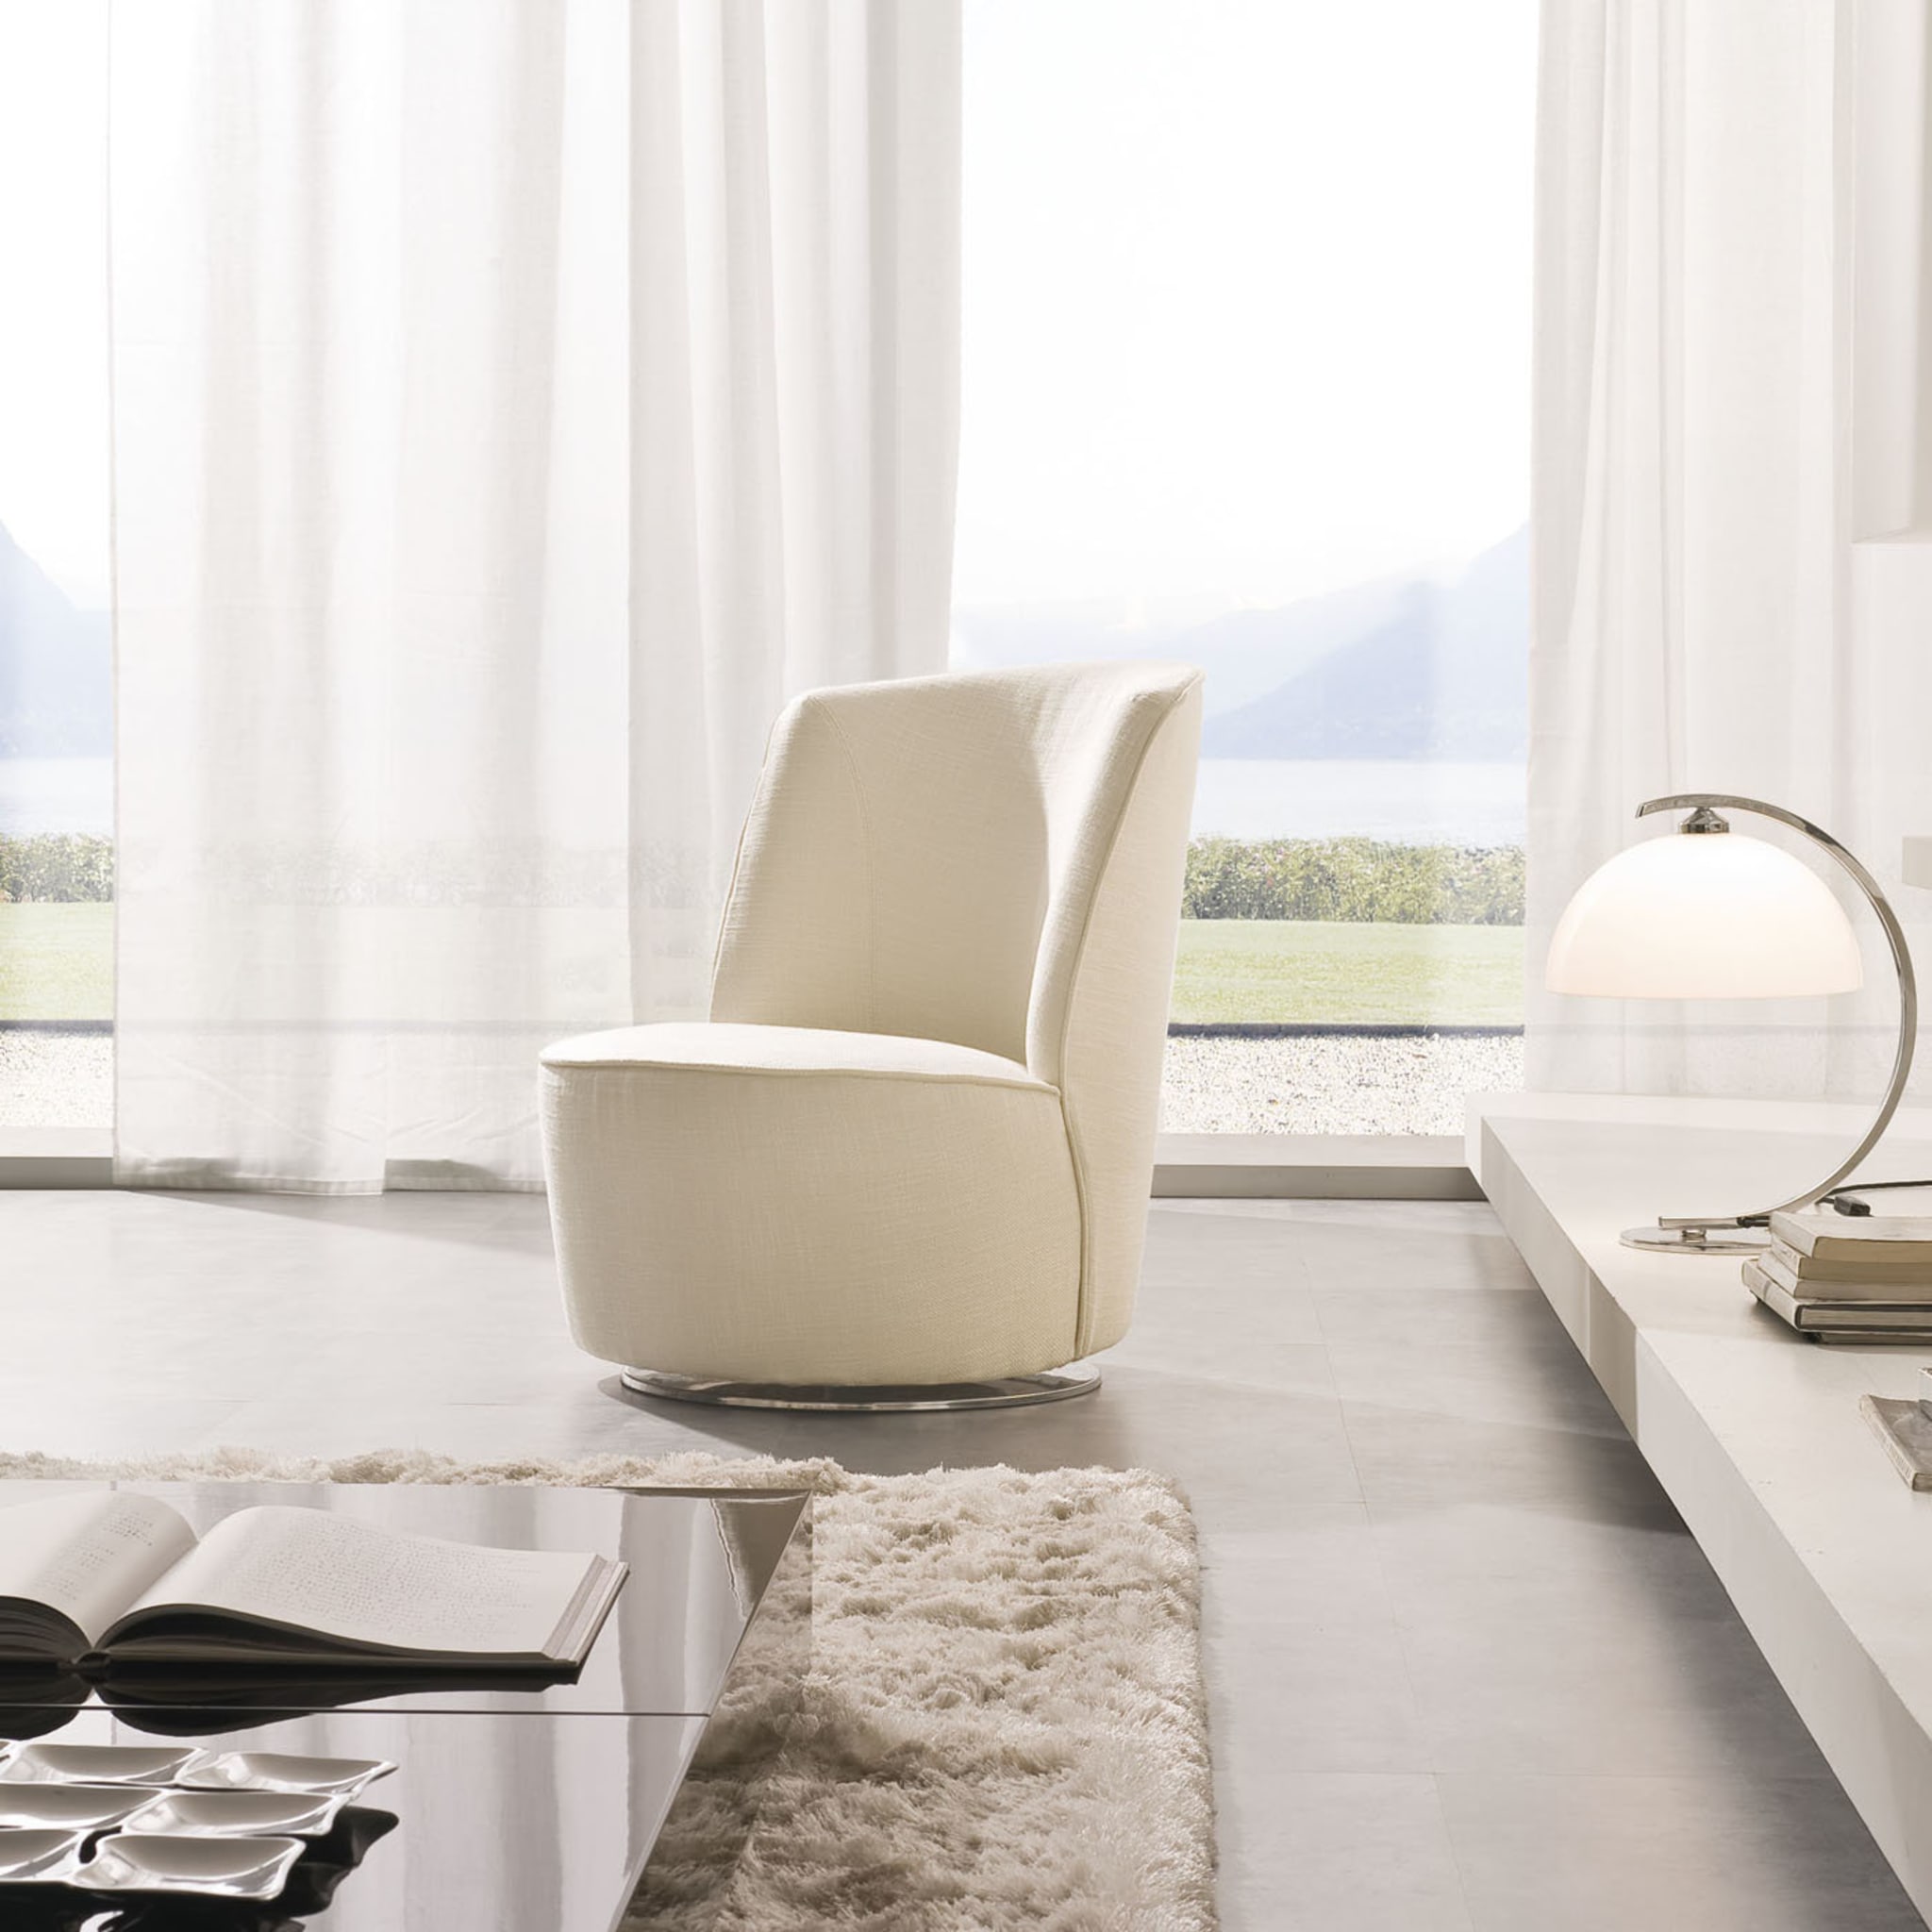 Cocoon Ivory Swivel Chair - Alternative view 1